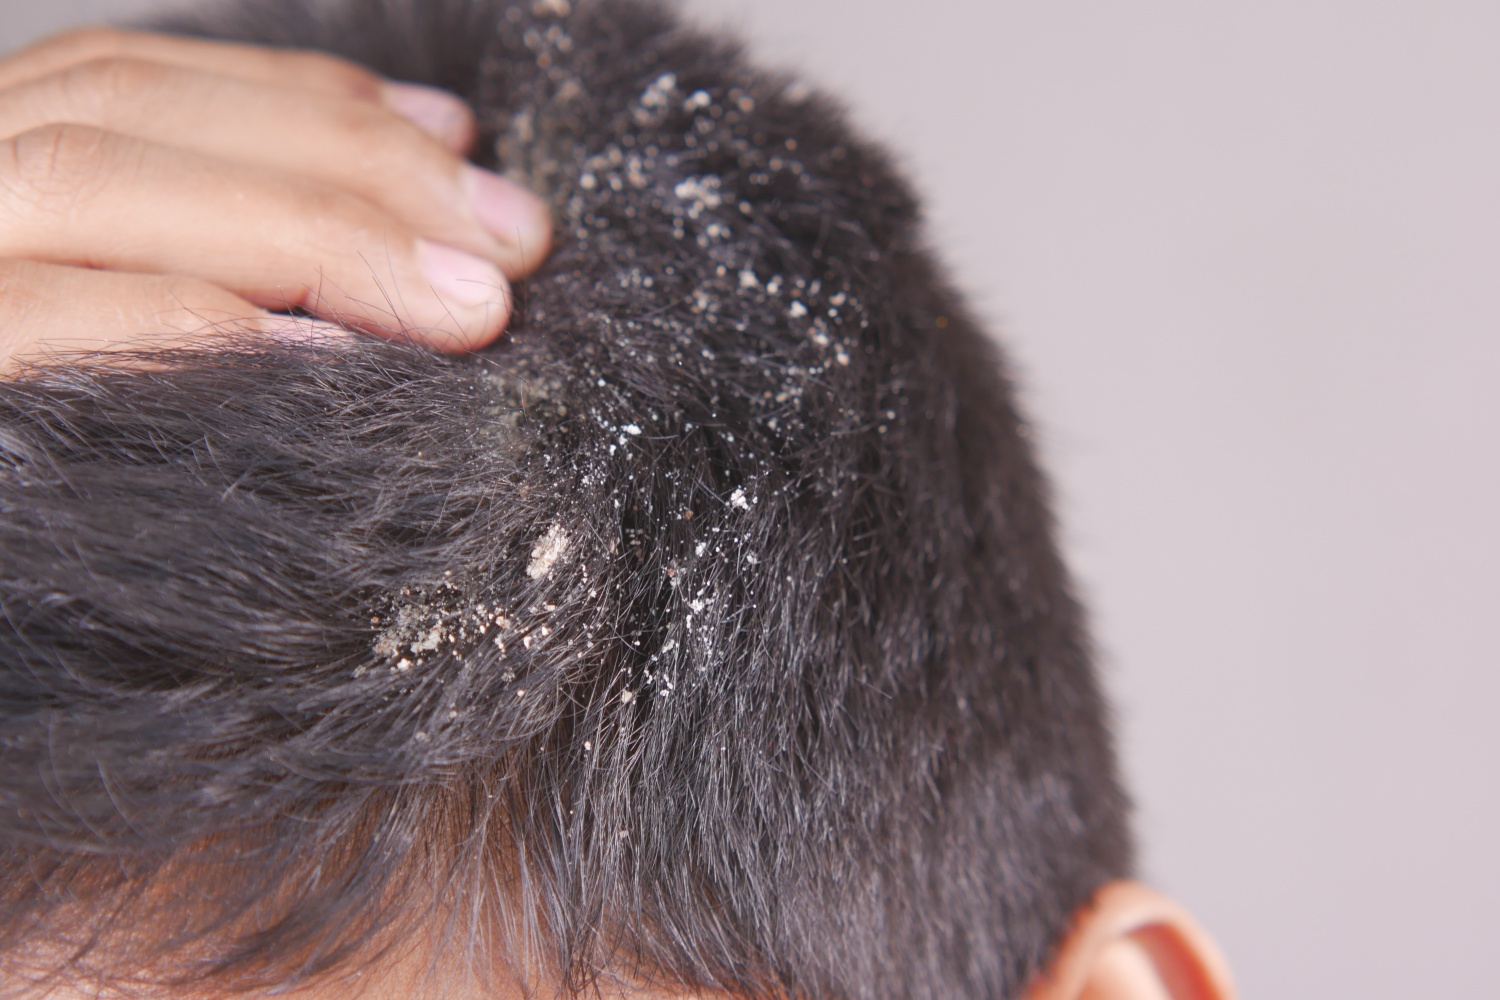 Dandruff: Causes and Lifestyle Changes That May Help